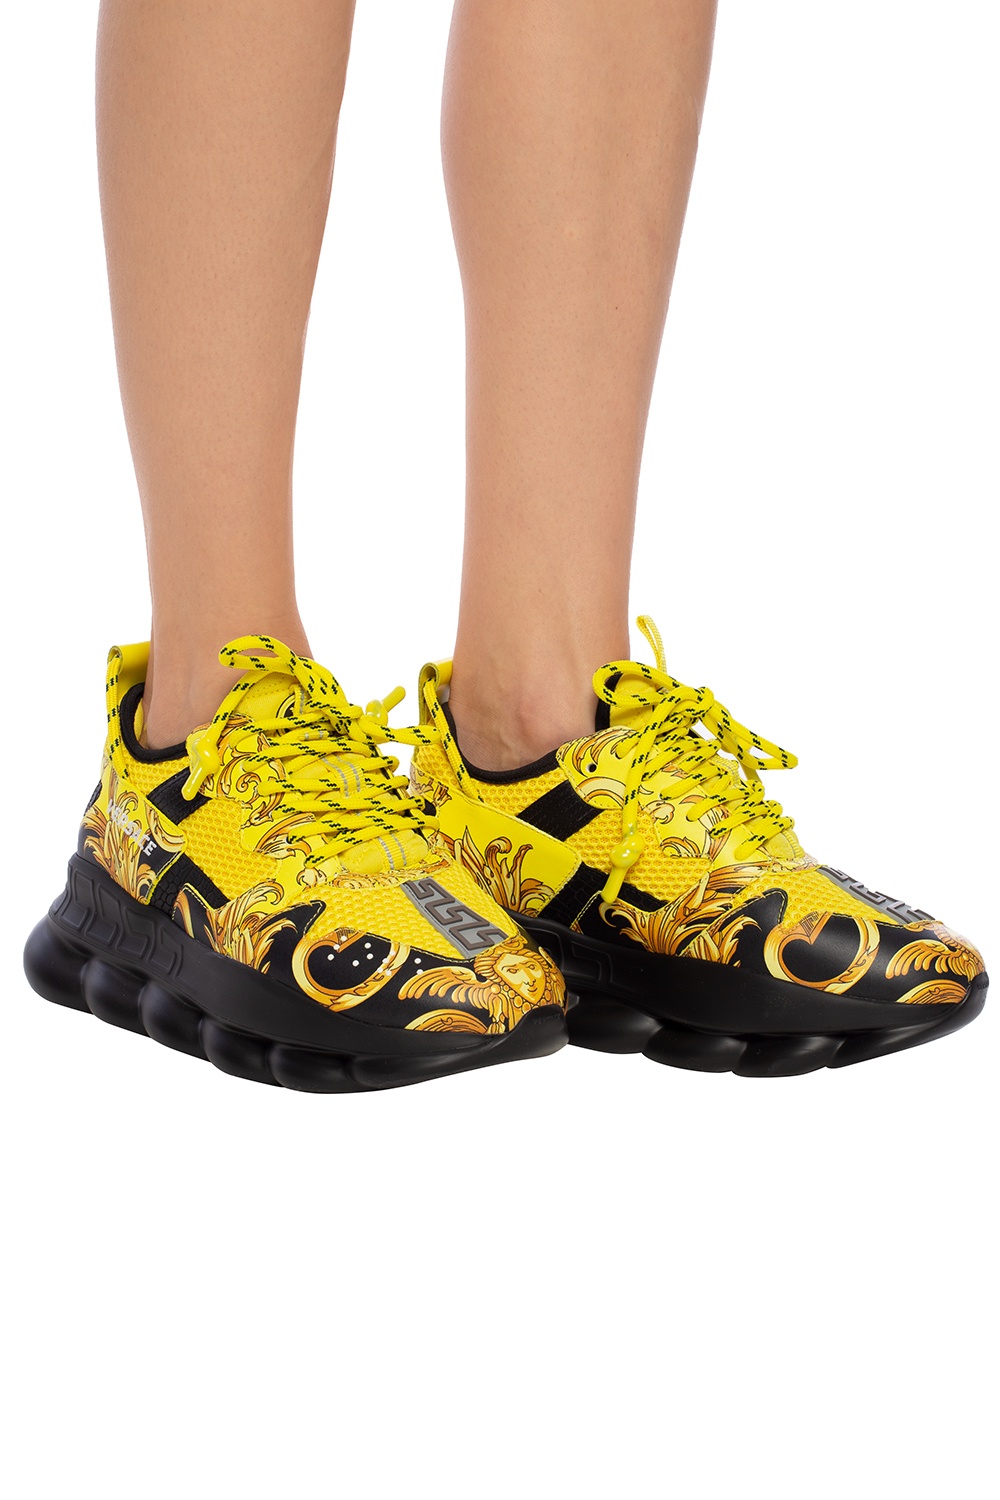 Versace 'Chain Reaction' sneakers with logo, Women's Shoes